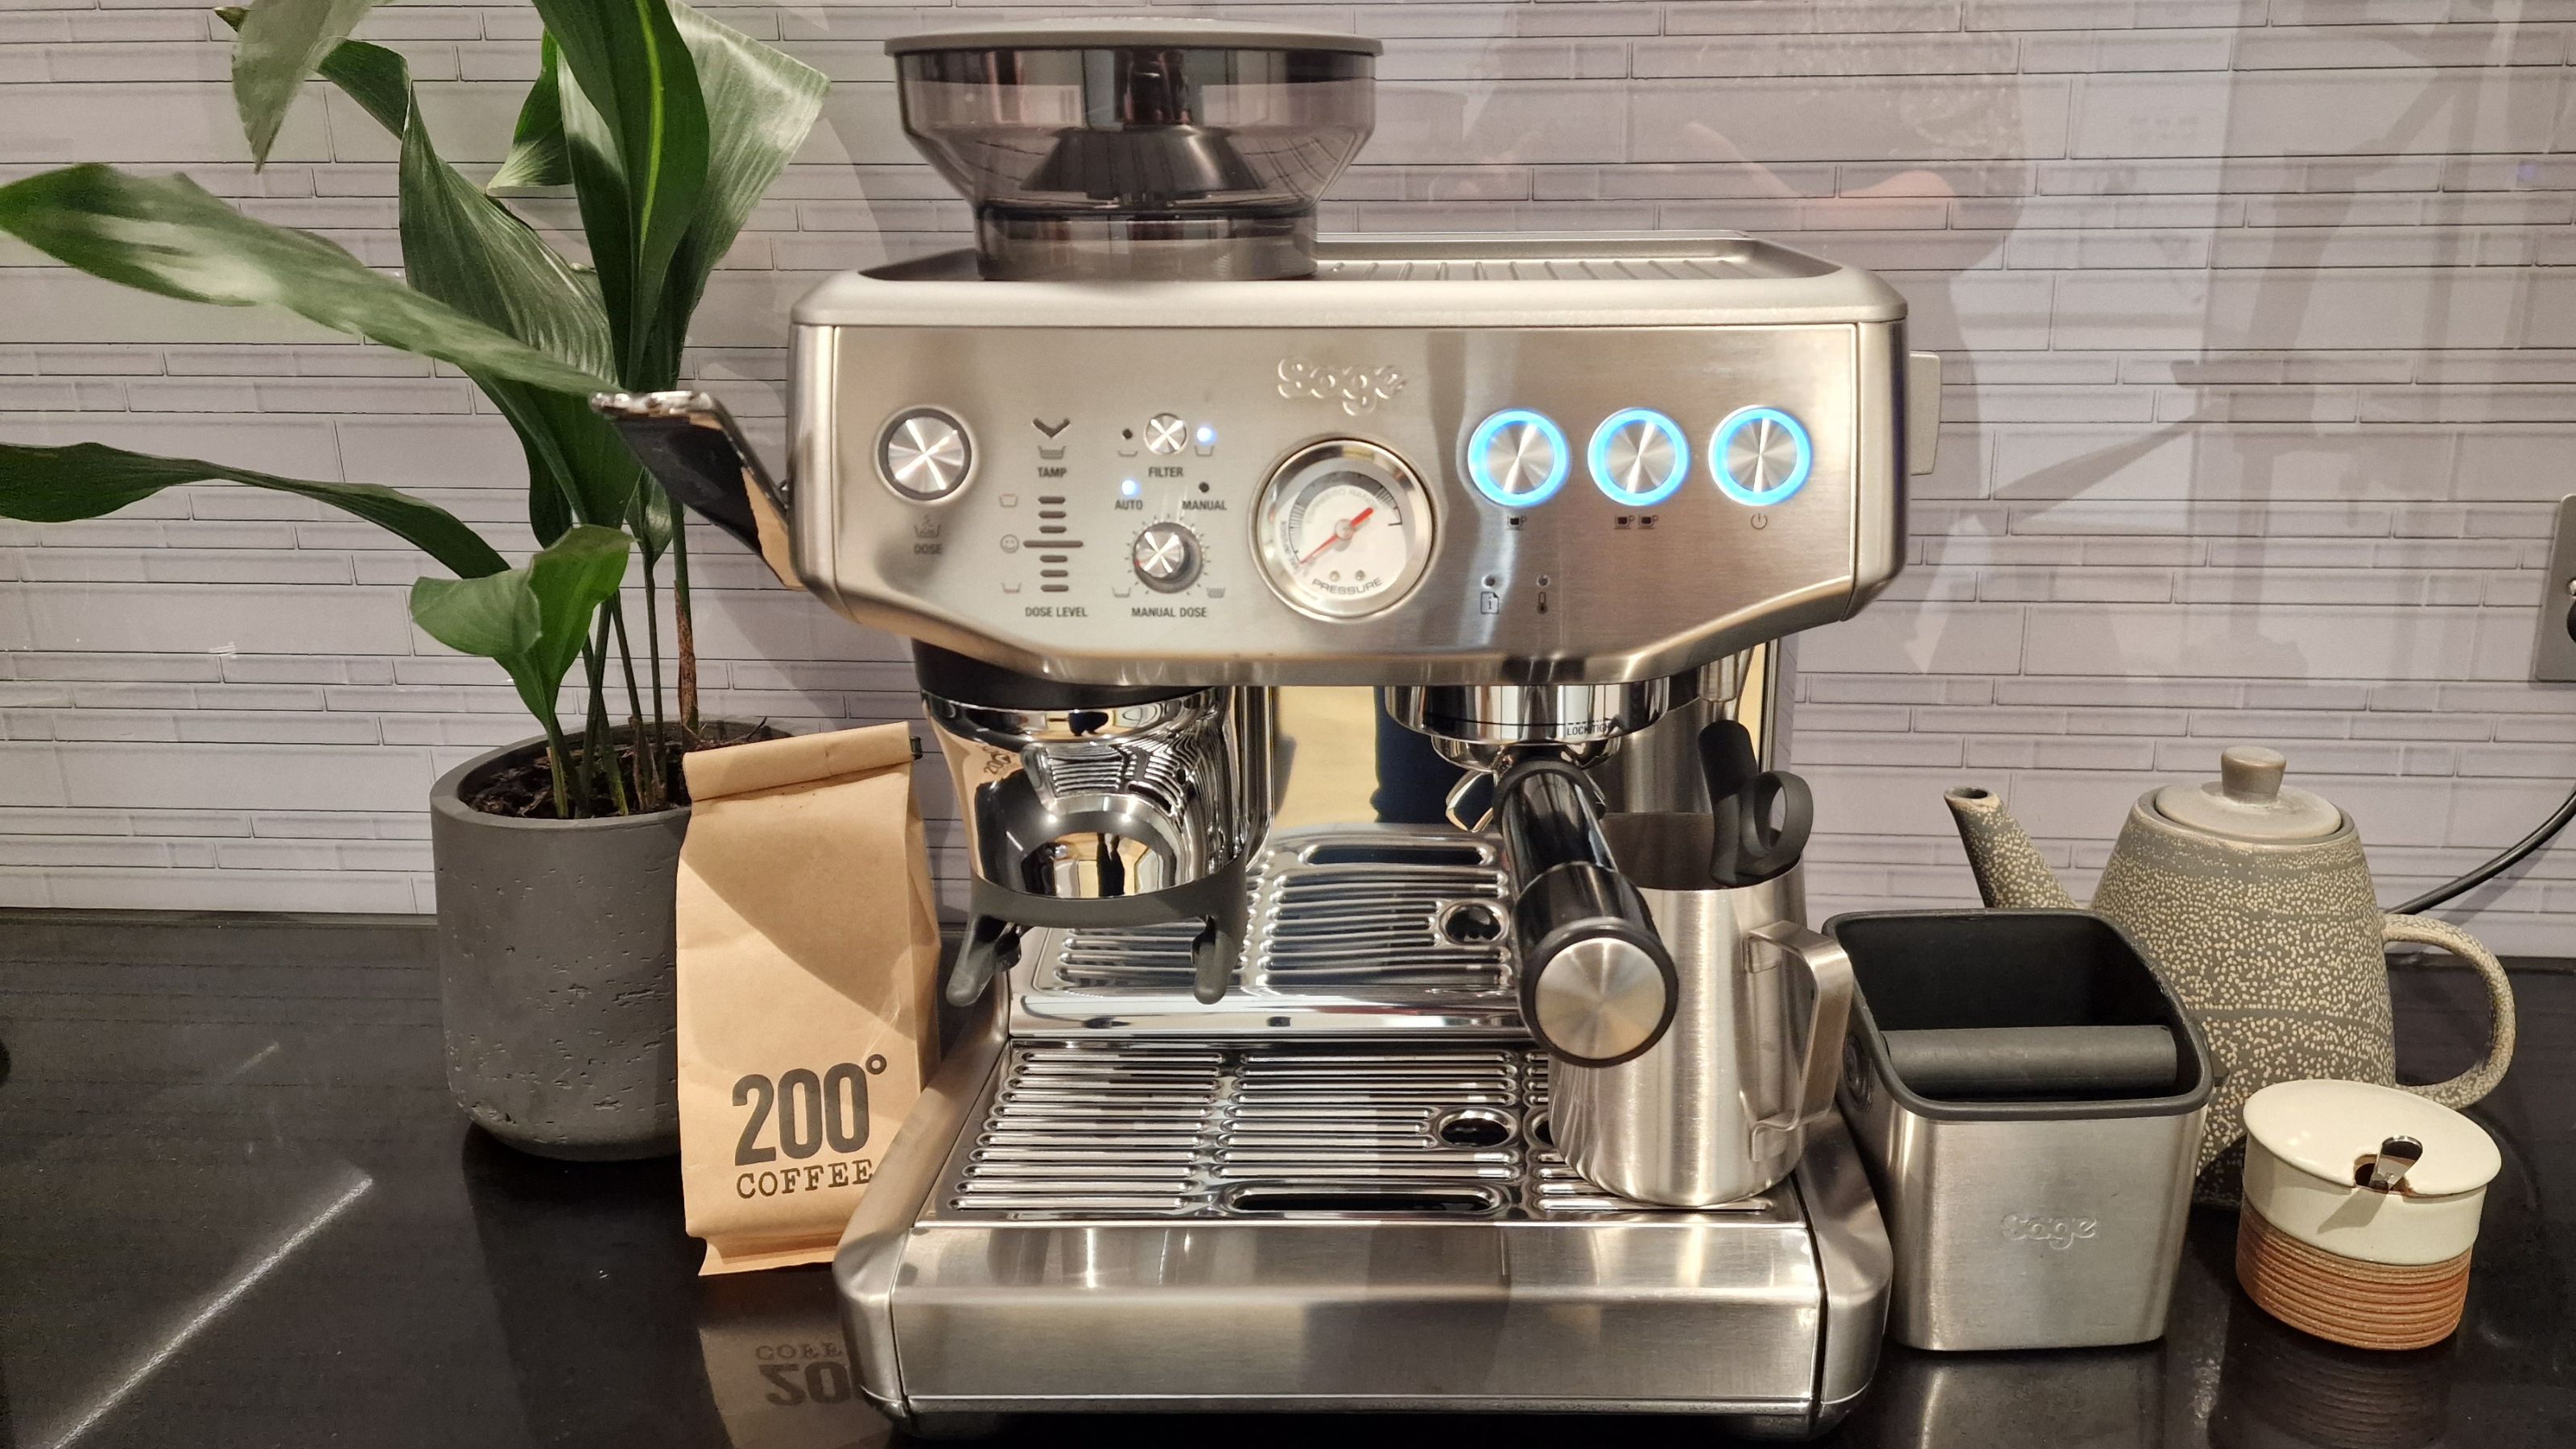 Sage's Barista Express Impress is the holy grail of homemade coffee